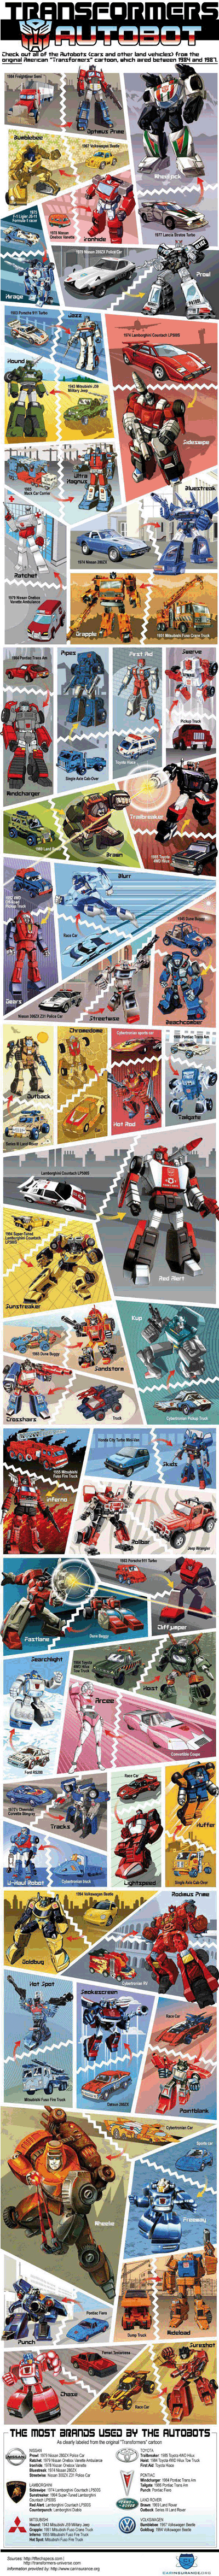 Transformers: Cars to Autobots Infographic